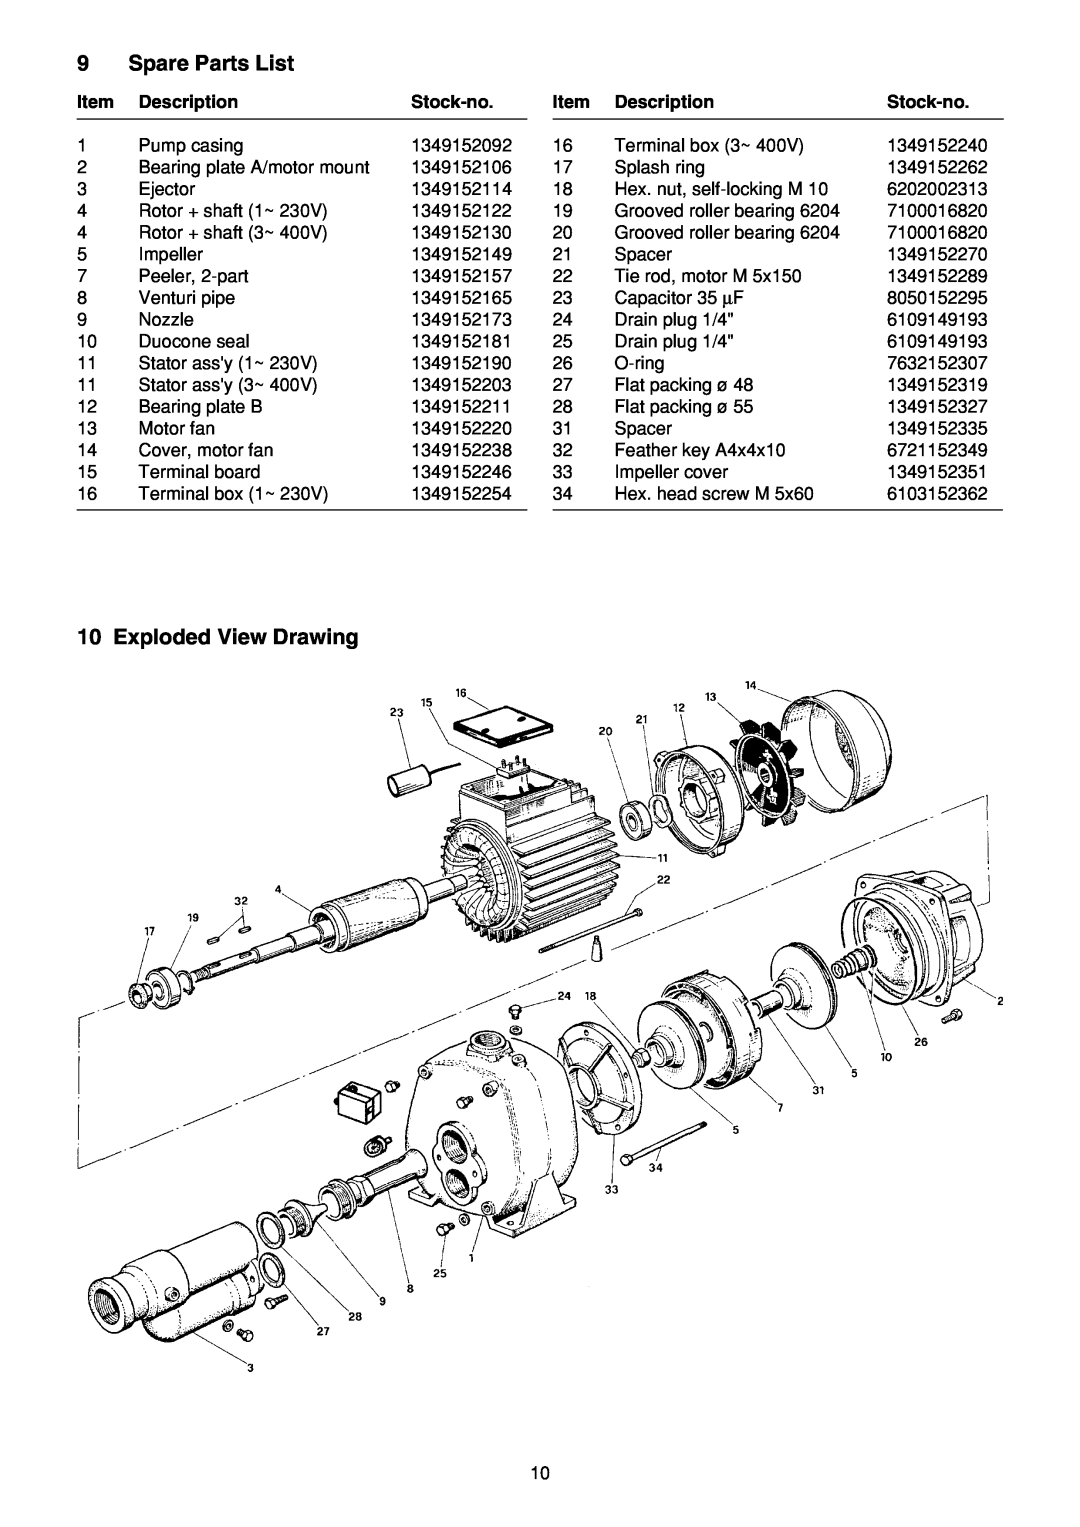 Metabo 1600 D, P 600, 1600 W manual 9Spare Parts List, Exploded View Drawing, Description, Stock-no 